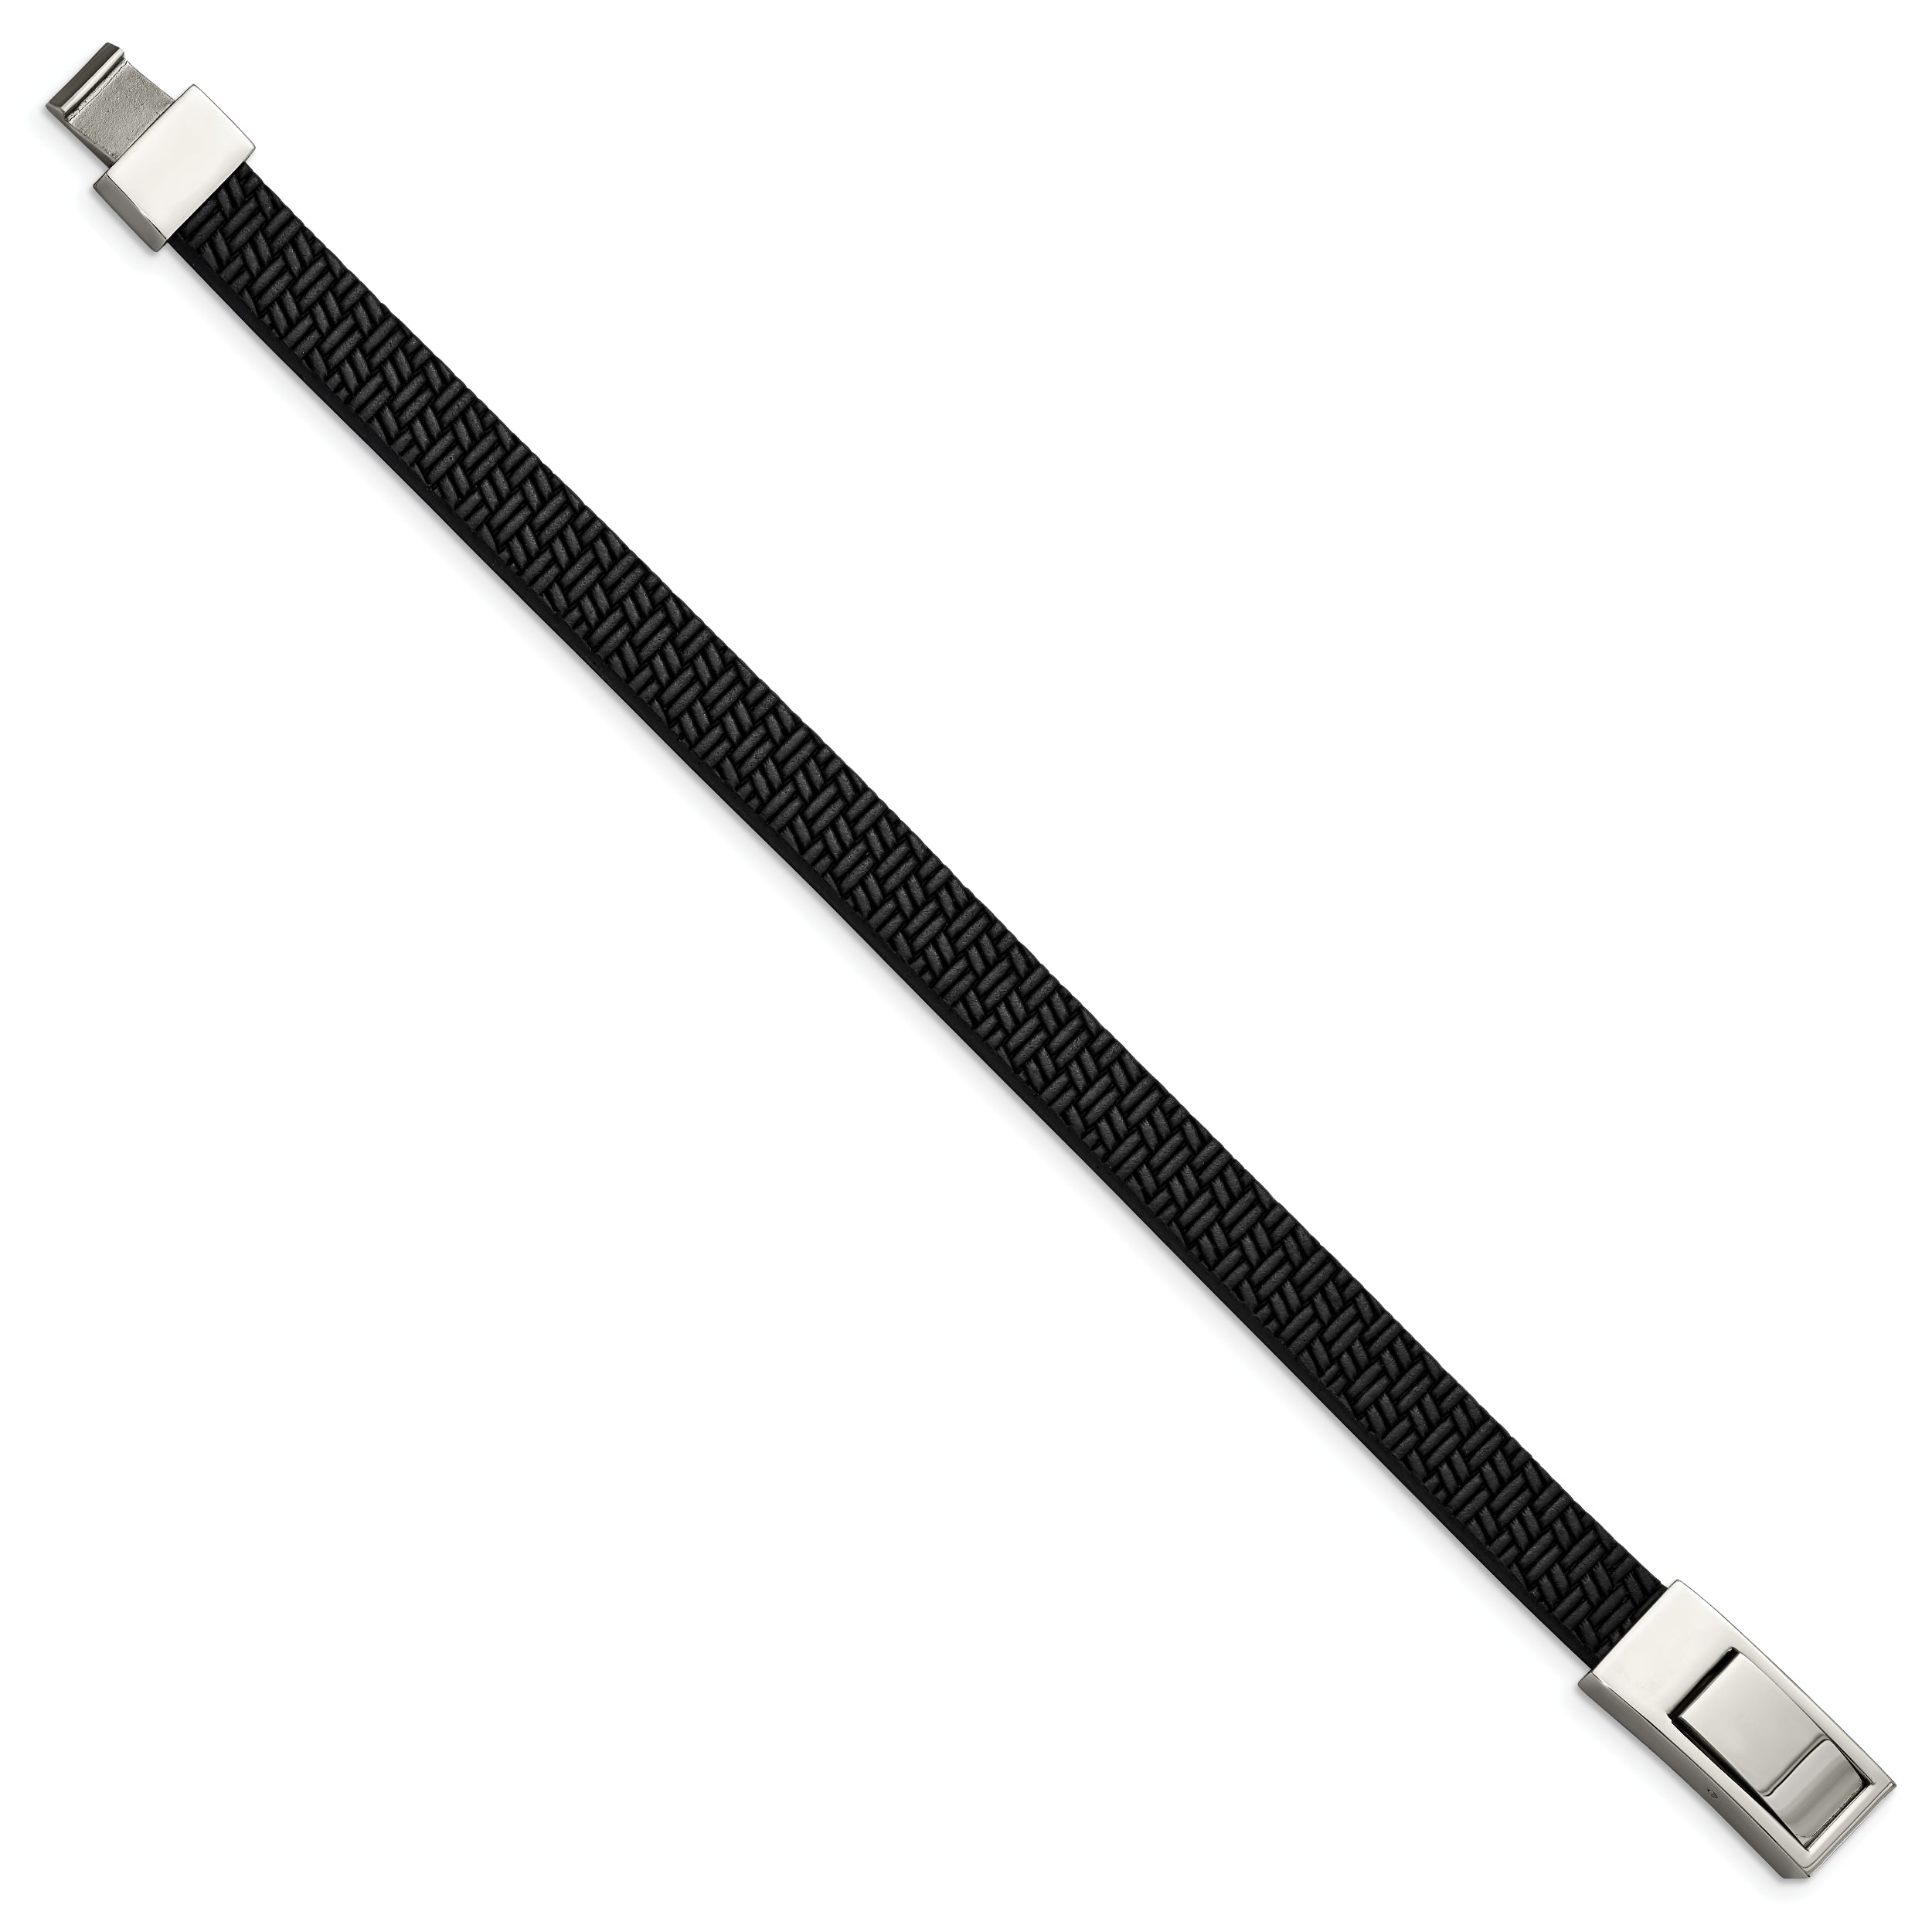 Chisel Stainless Steel Polished Textured Black Leather 8.5 inch Bracelet